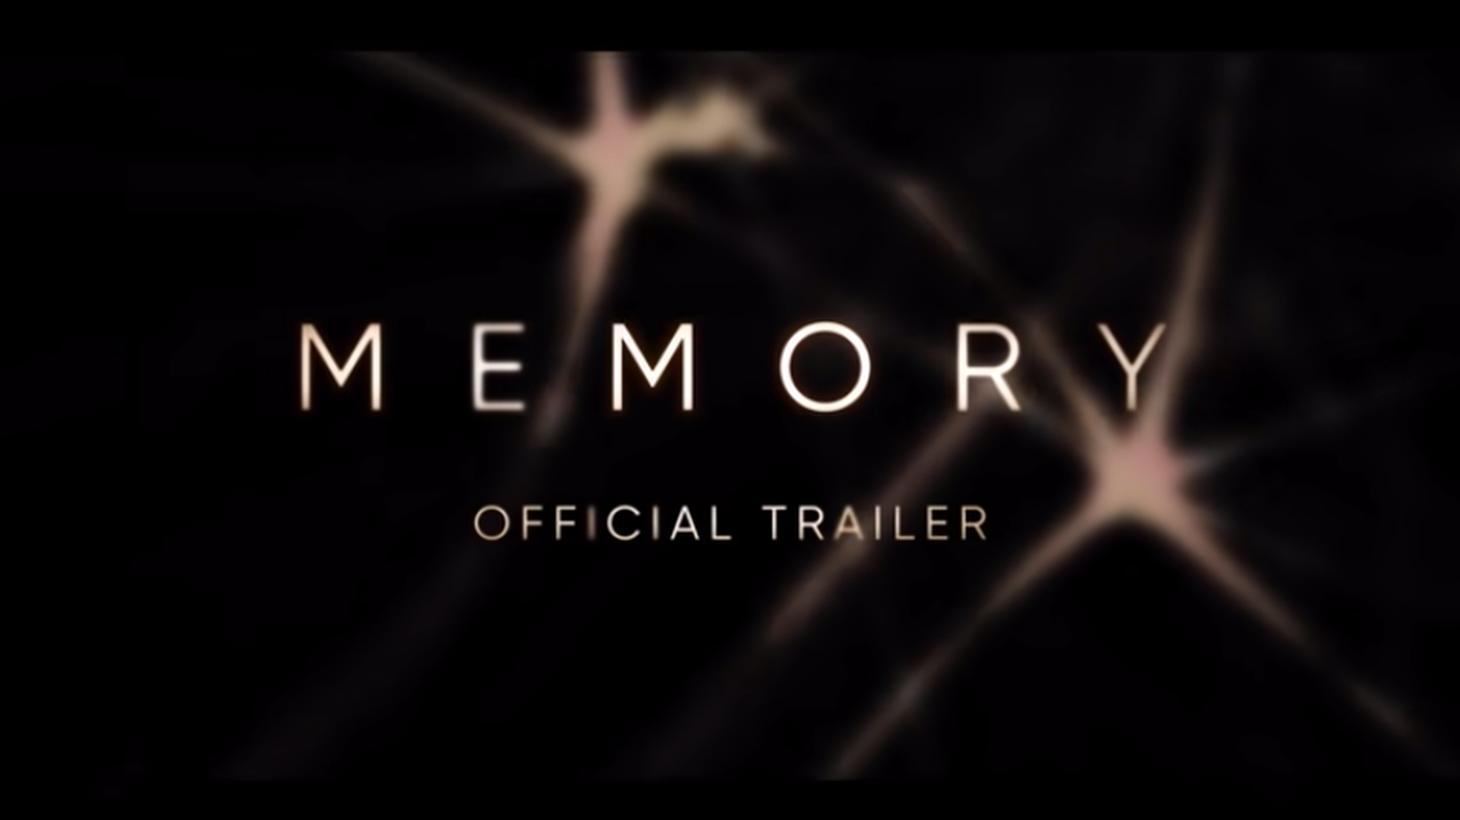 “Memory” stars Liam Neeson as Alex Lewis, an assassin whose memory begins to falter.